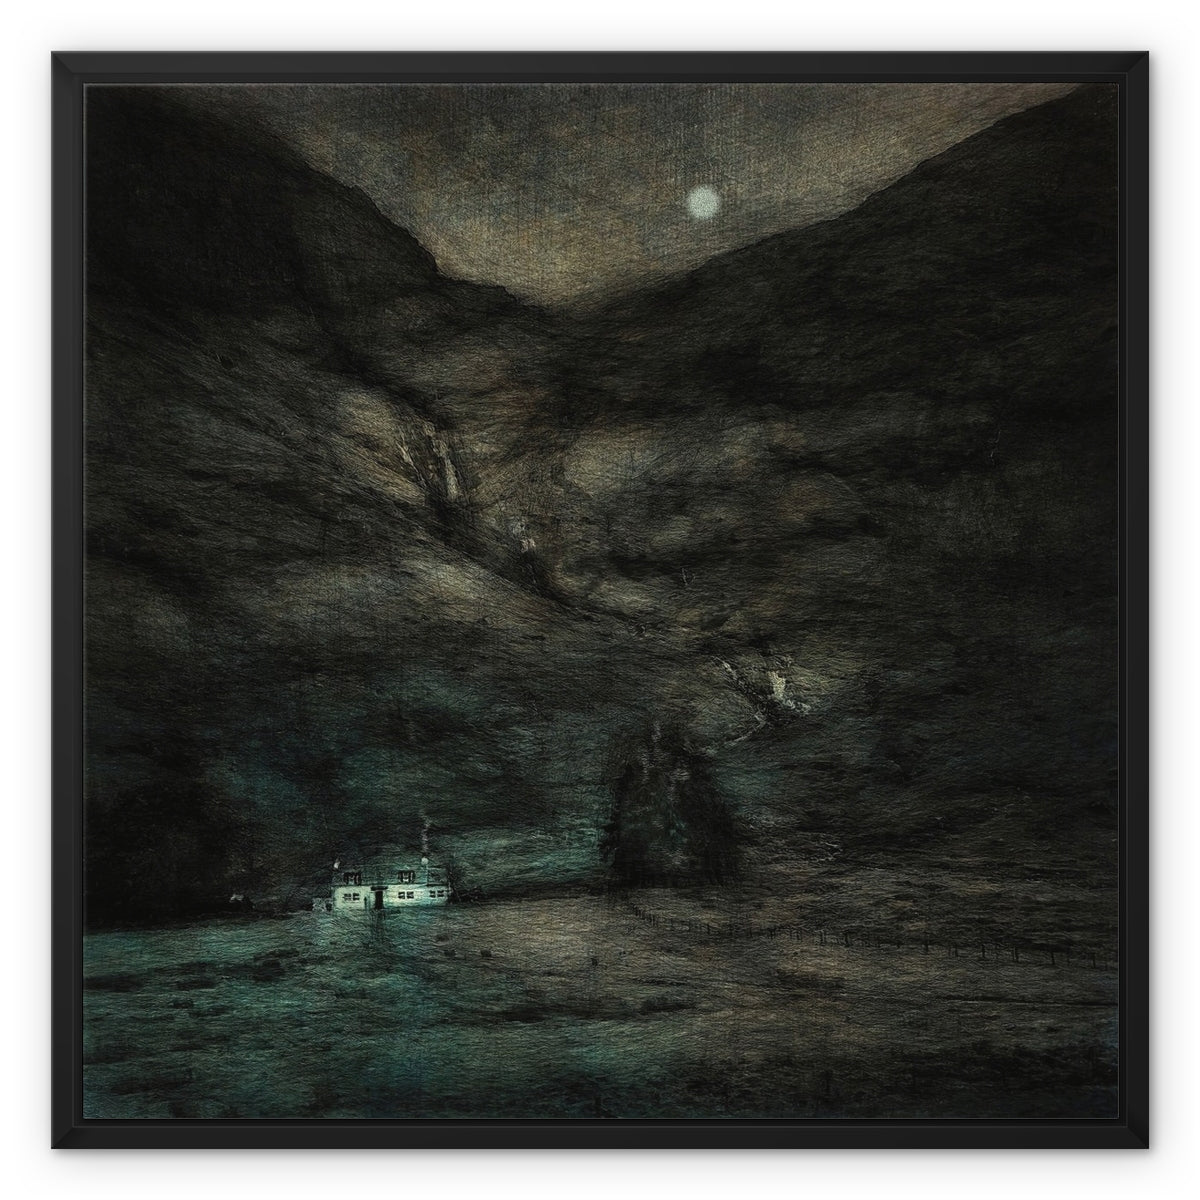 Glencoe Cottage Moonlight Painting | Framed Canvas From Scotland-Floating Framed Canvas Prints-Glencoe Art Gallery-24"x24"-Paintings, Prints, Homeware, Art Gifts From Scotland By Scottish Artist Kevin Hunter